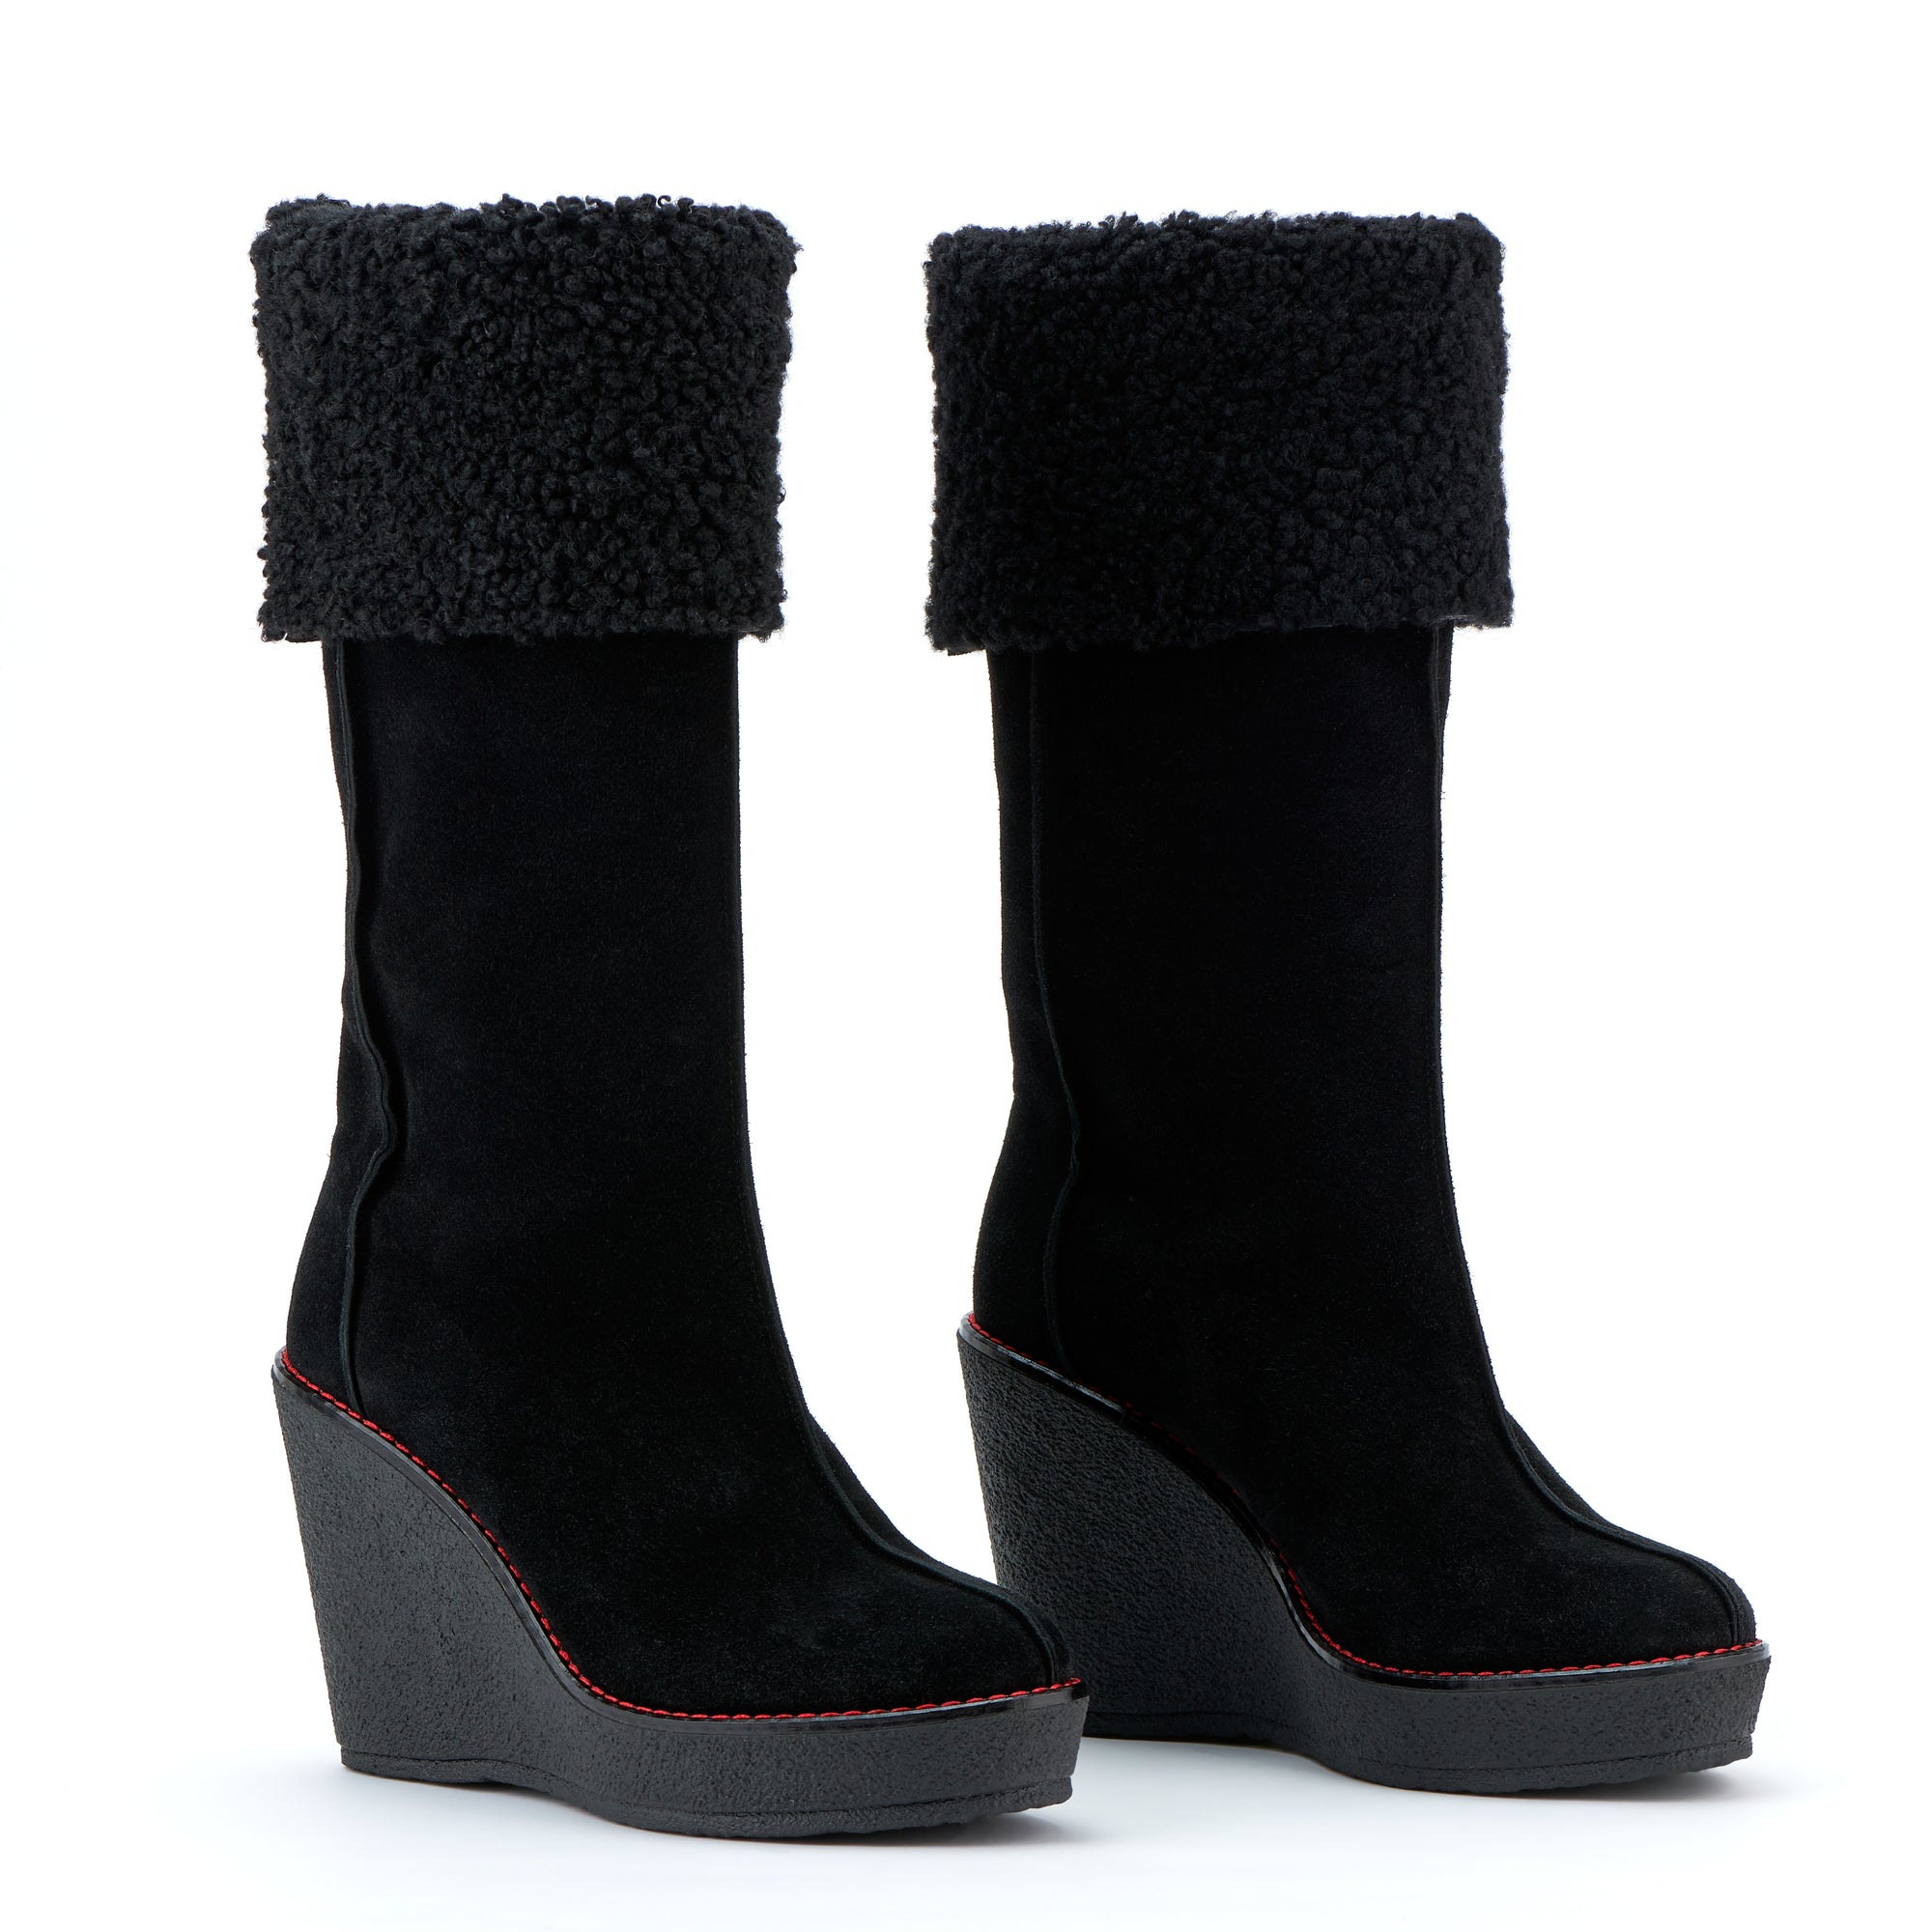 Camilla 100 wedge heel ankle boots in calfhair - Black